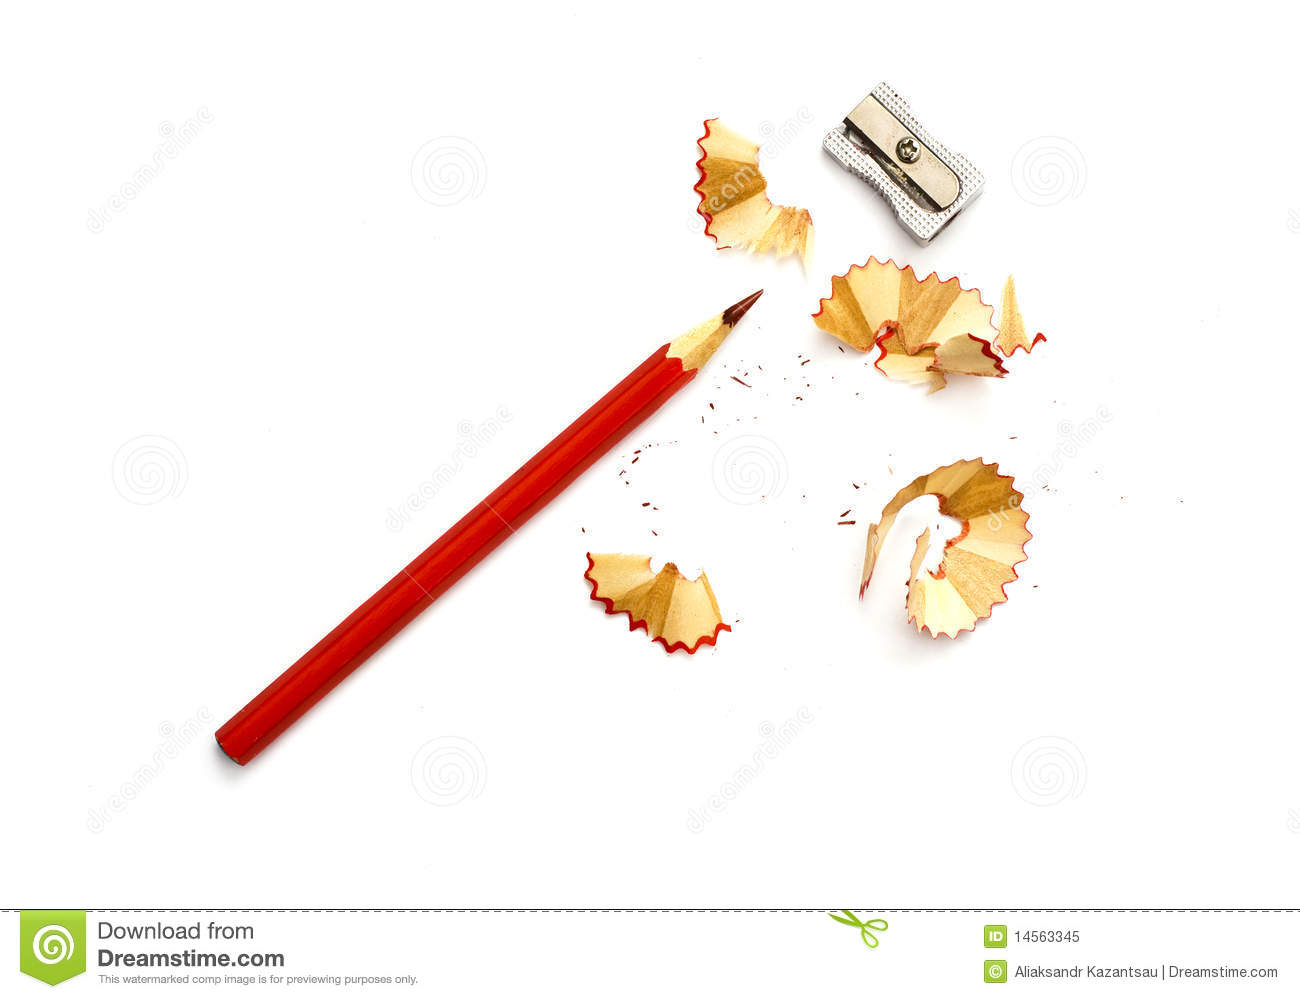 Sharpened Pencil With Sharpener And Shavings